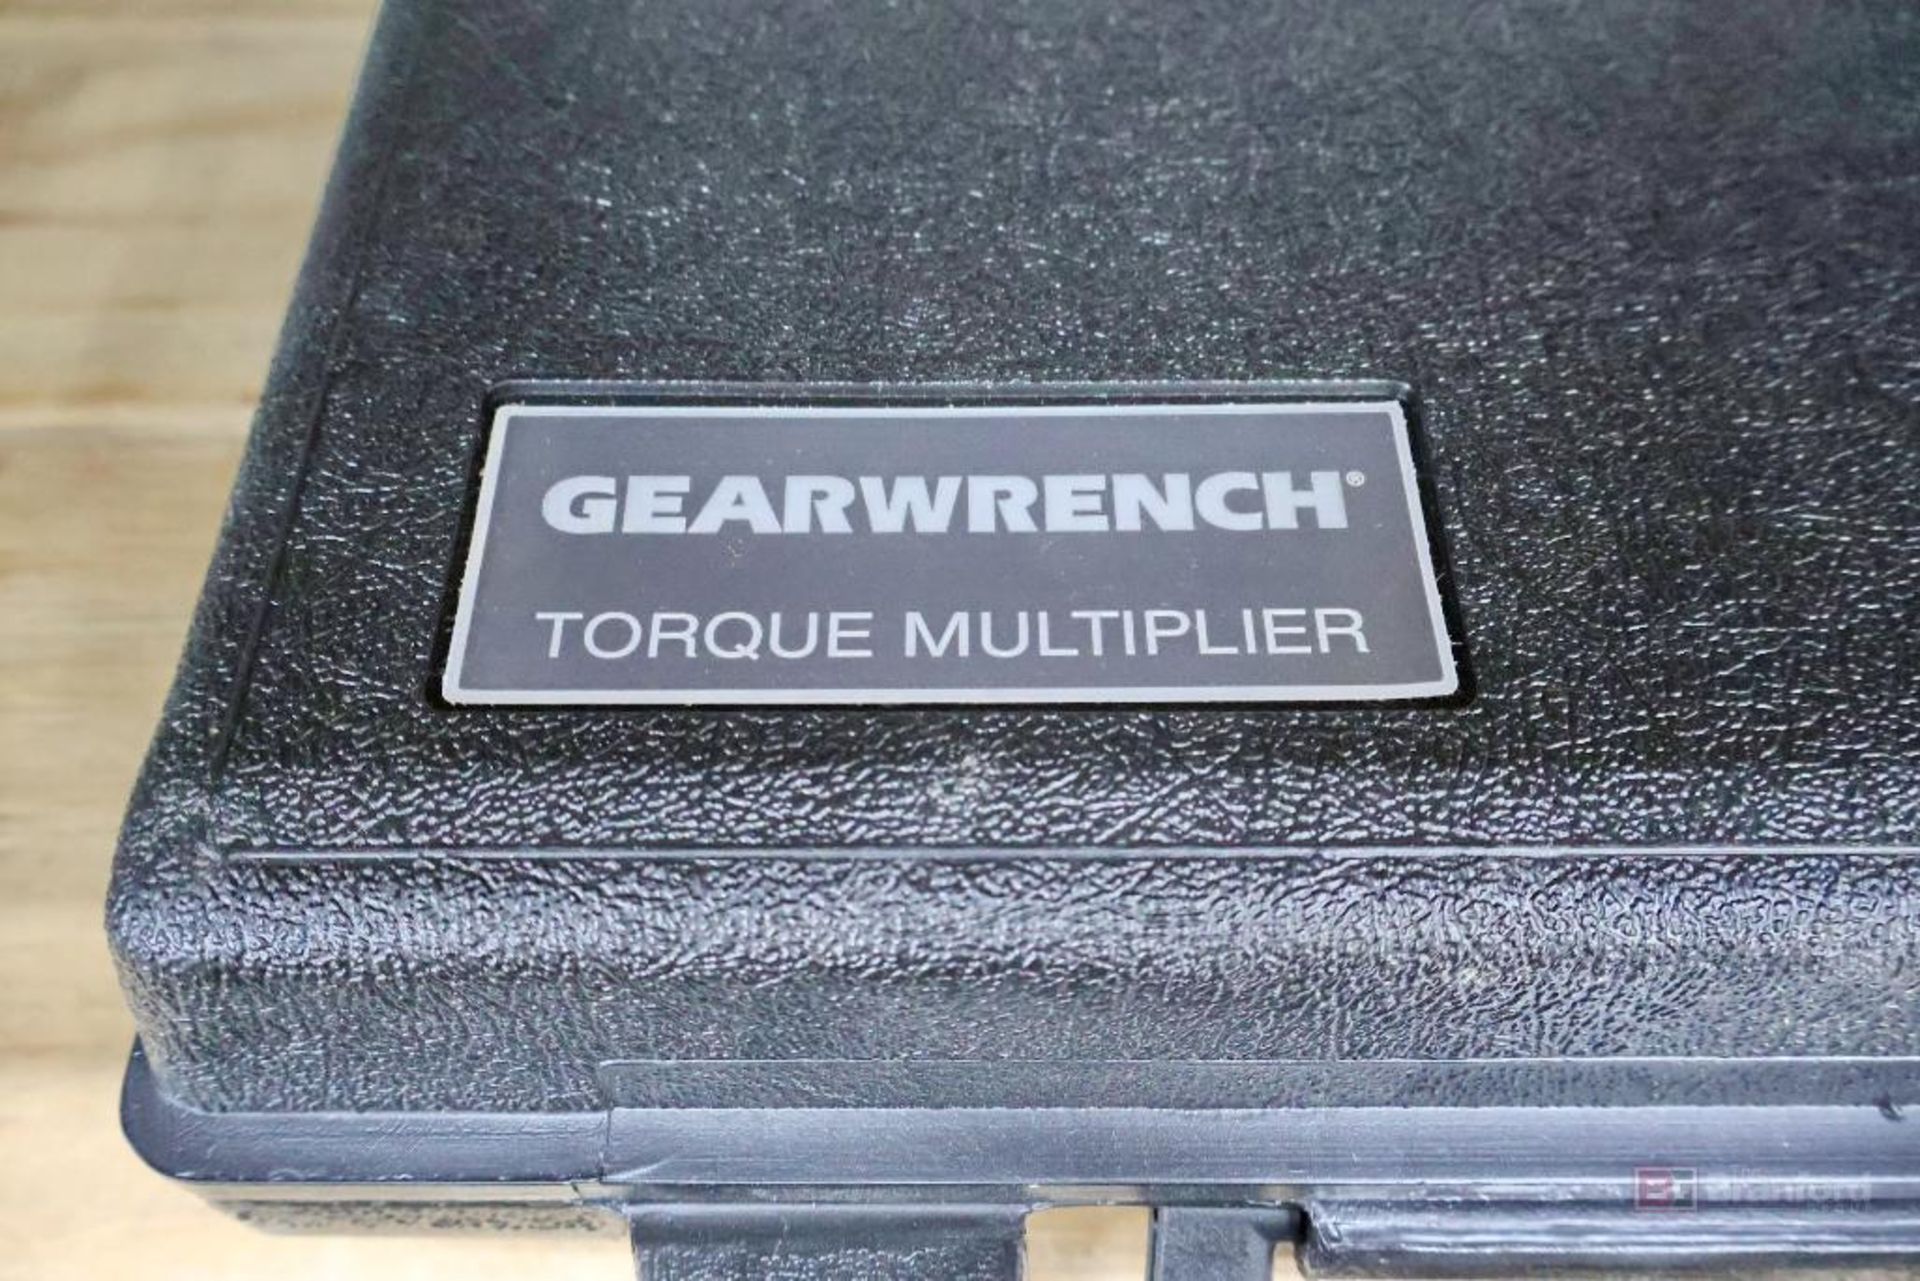 GearWrench 64-836G Torque Multiplier - Image 8 of 9